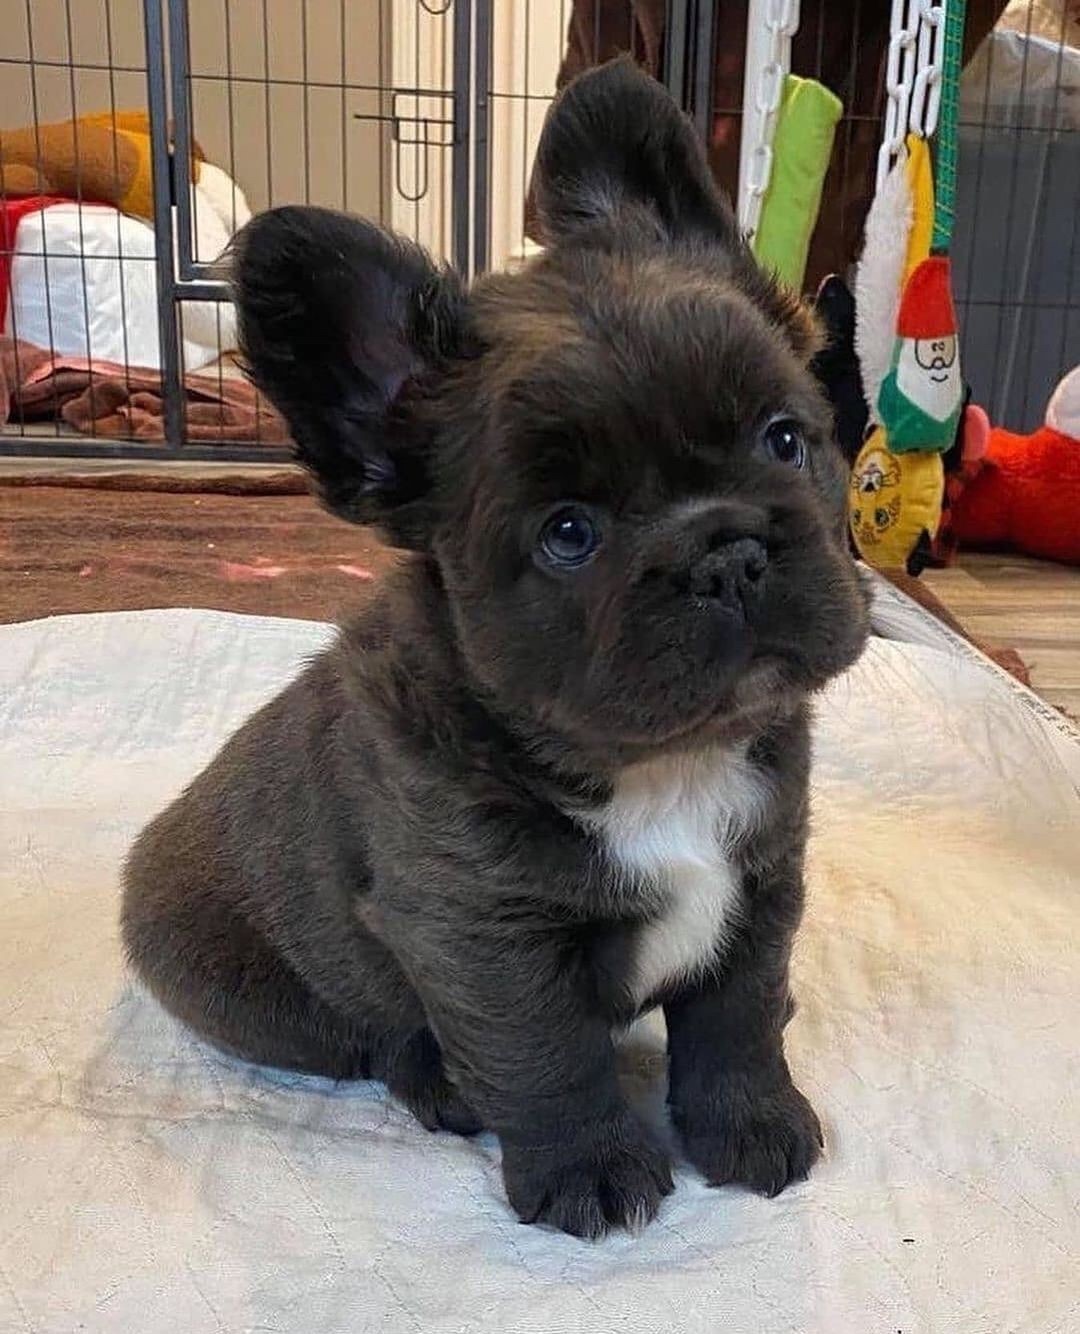 From @taylored_dachshunds: “Ever seen a fluffy frenchie before? 😍” #cutepetclub [ ]